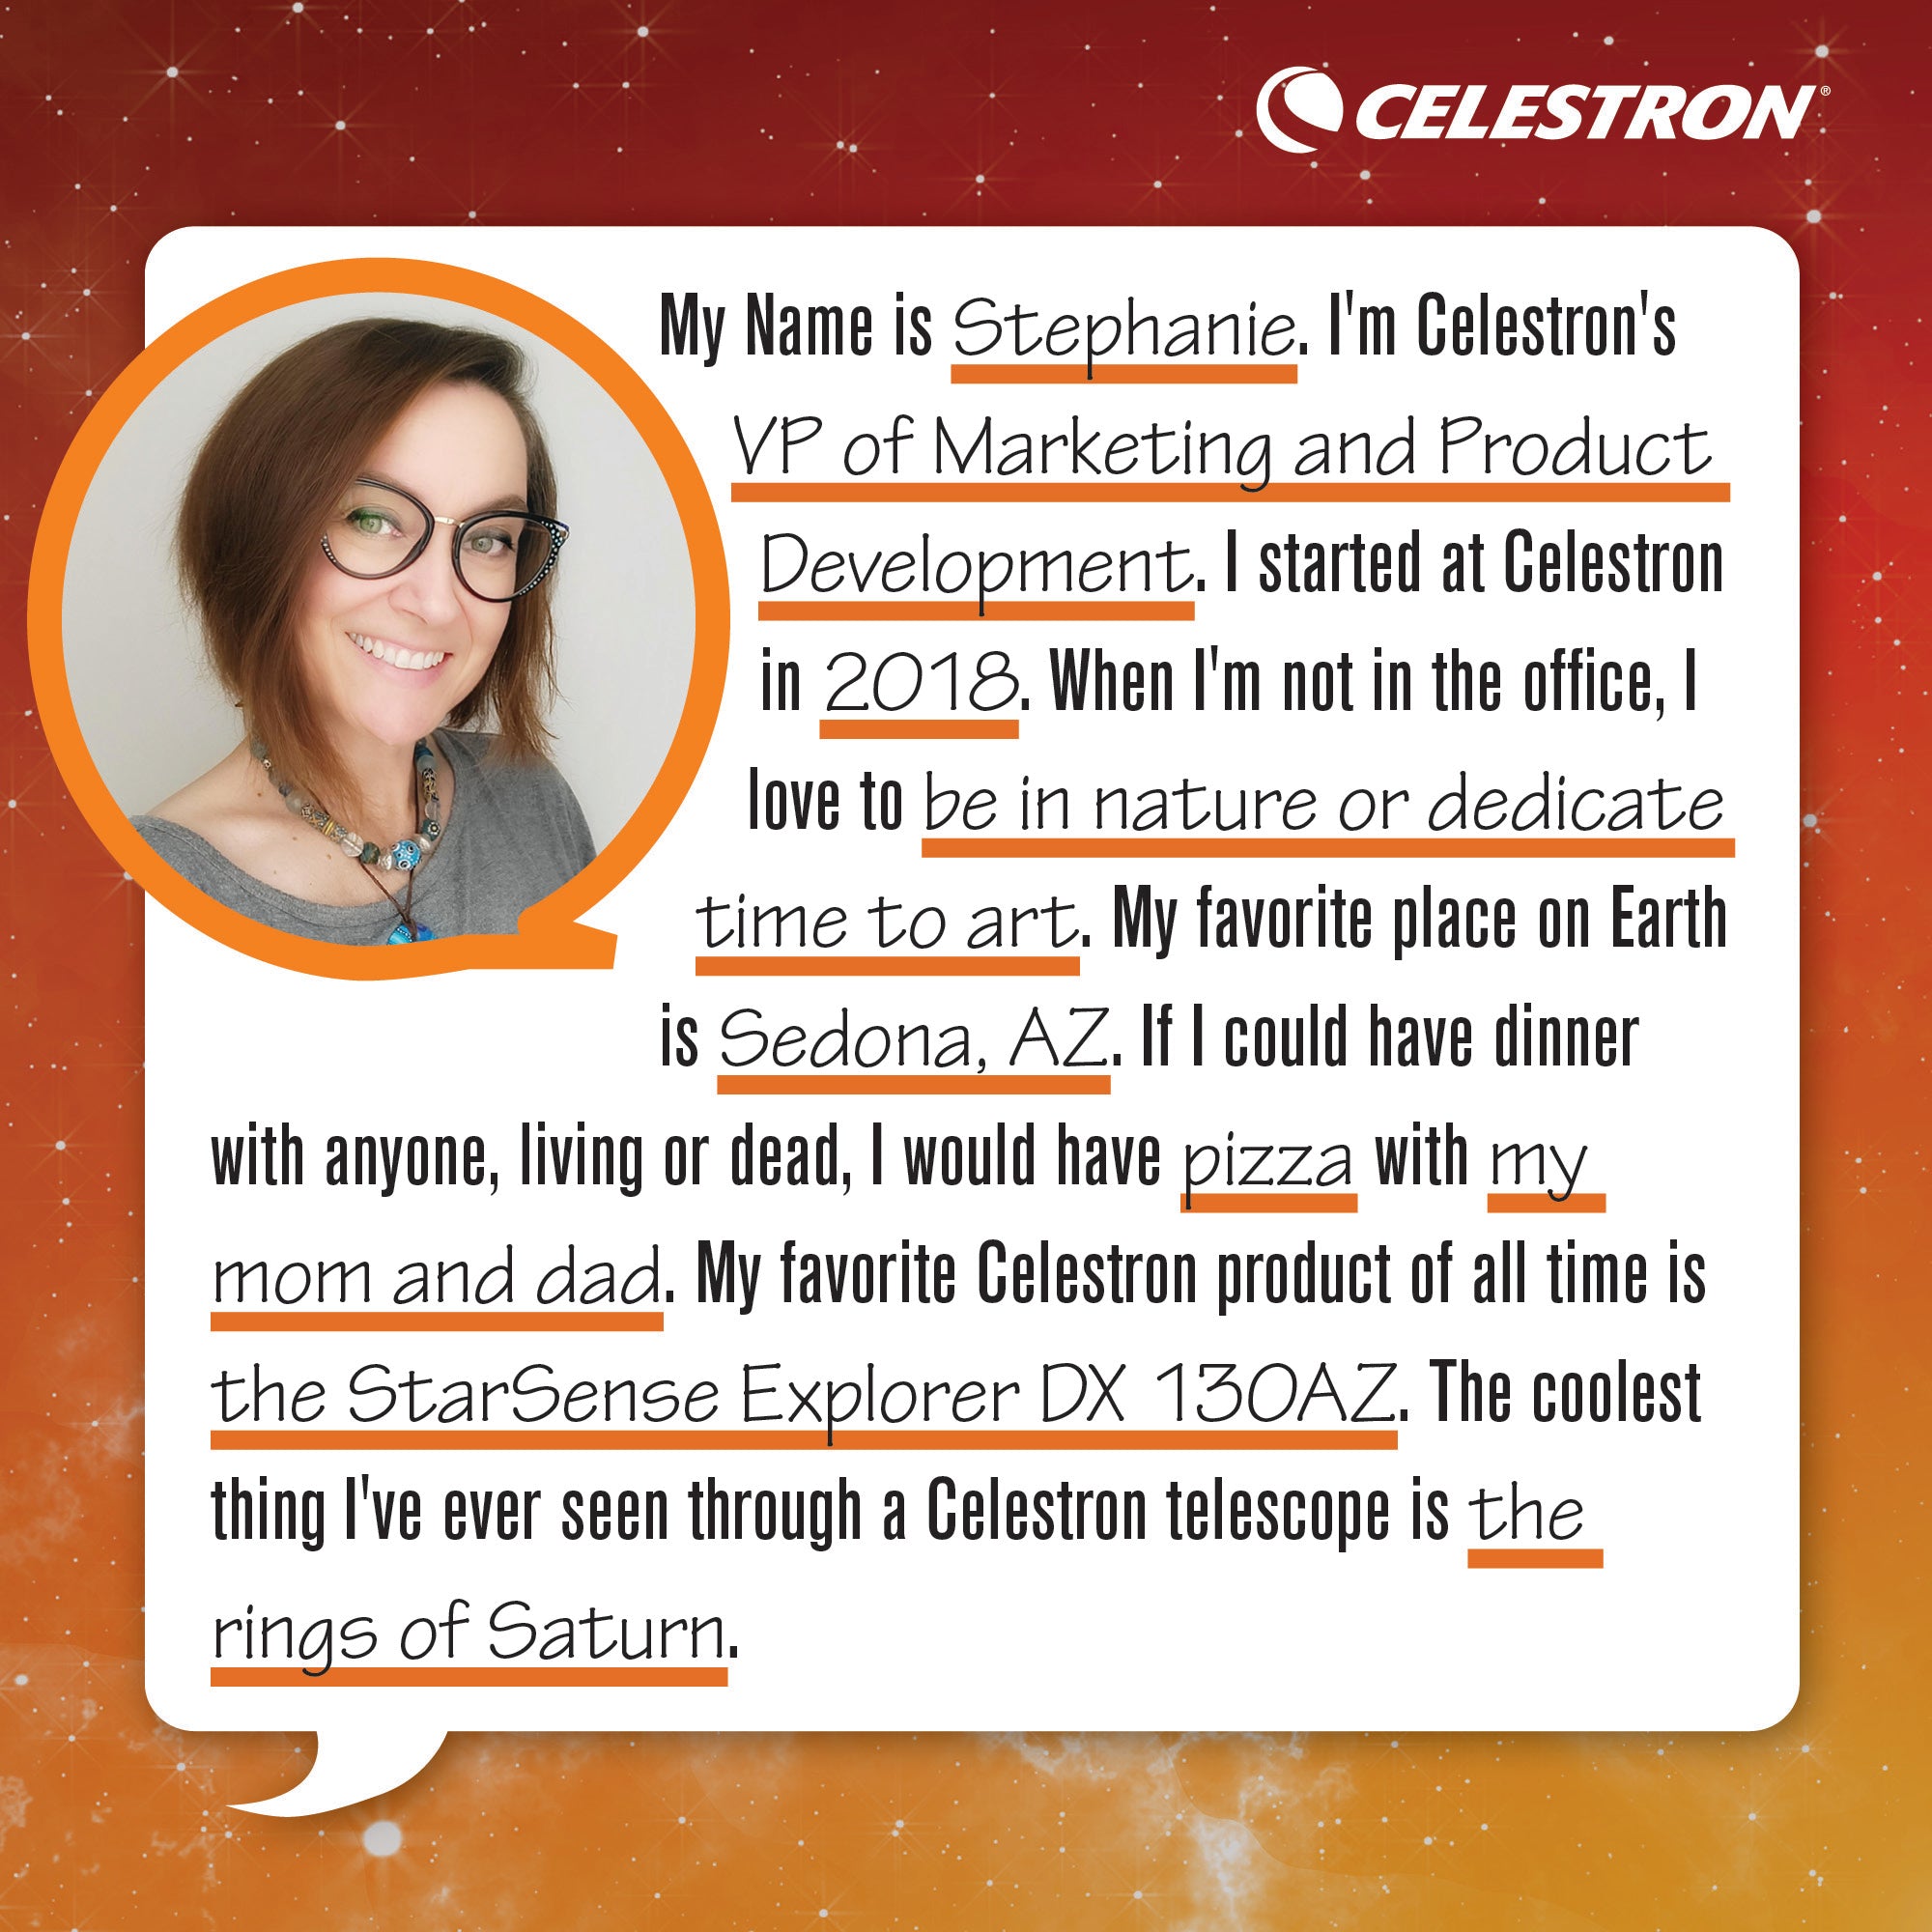 My name is Stephanie. I'm a Celestron's VP of Marketing and Product Development. I started at Celestron in 2018. When I'm not in the office, I love to be in nature and dedicate time to art.  My favorite place on Earth is Sedona, AZ. If I could have dinner with anyone, living or dead, I would have pizza with mom and dad. My favorite Celestron product of all time is the StarSense Explorer DX 130AZ. The coolest thing I've ever seen through a Celestron telescope is the rings of Saturn.